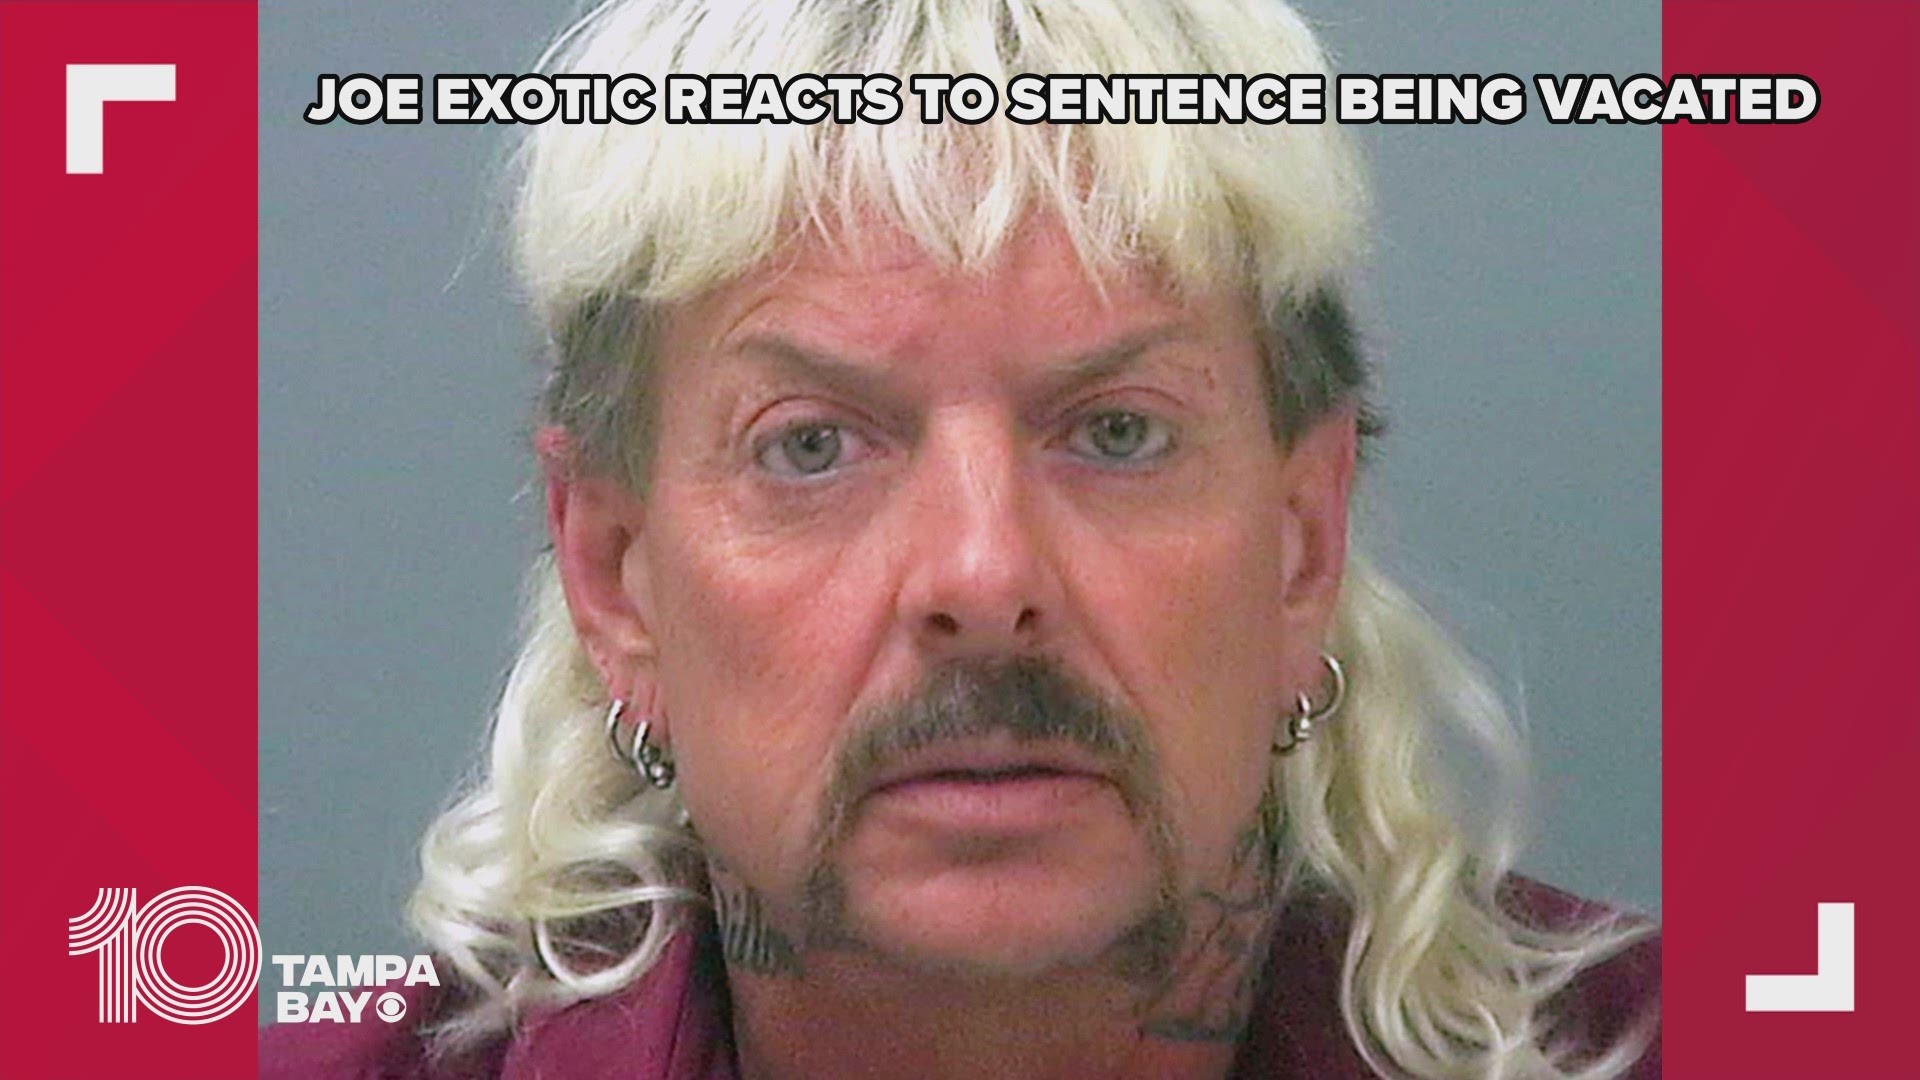 'Tiger King' star Joe Exotic released an audio statement through his lawyers after learning he'd be re-sentenced for his murder-for-hire convictions.